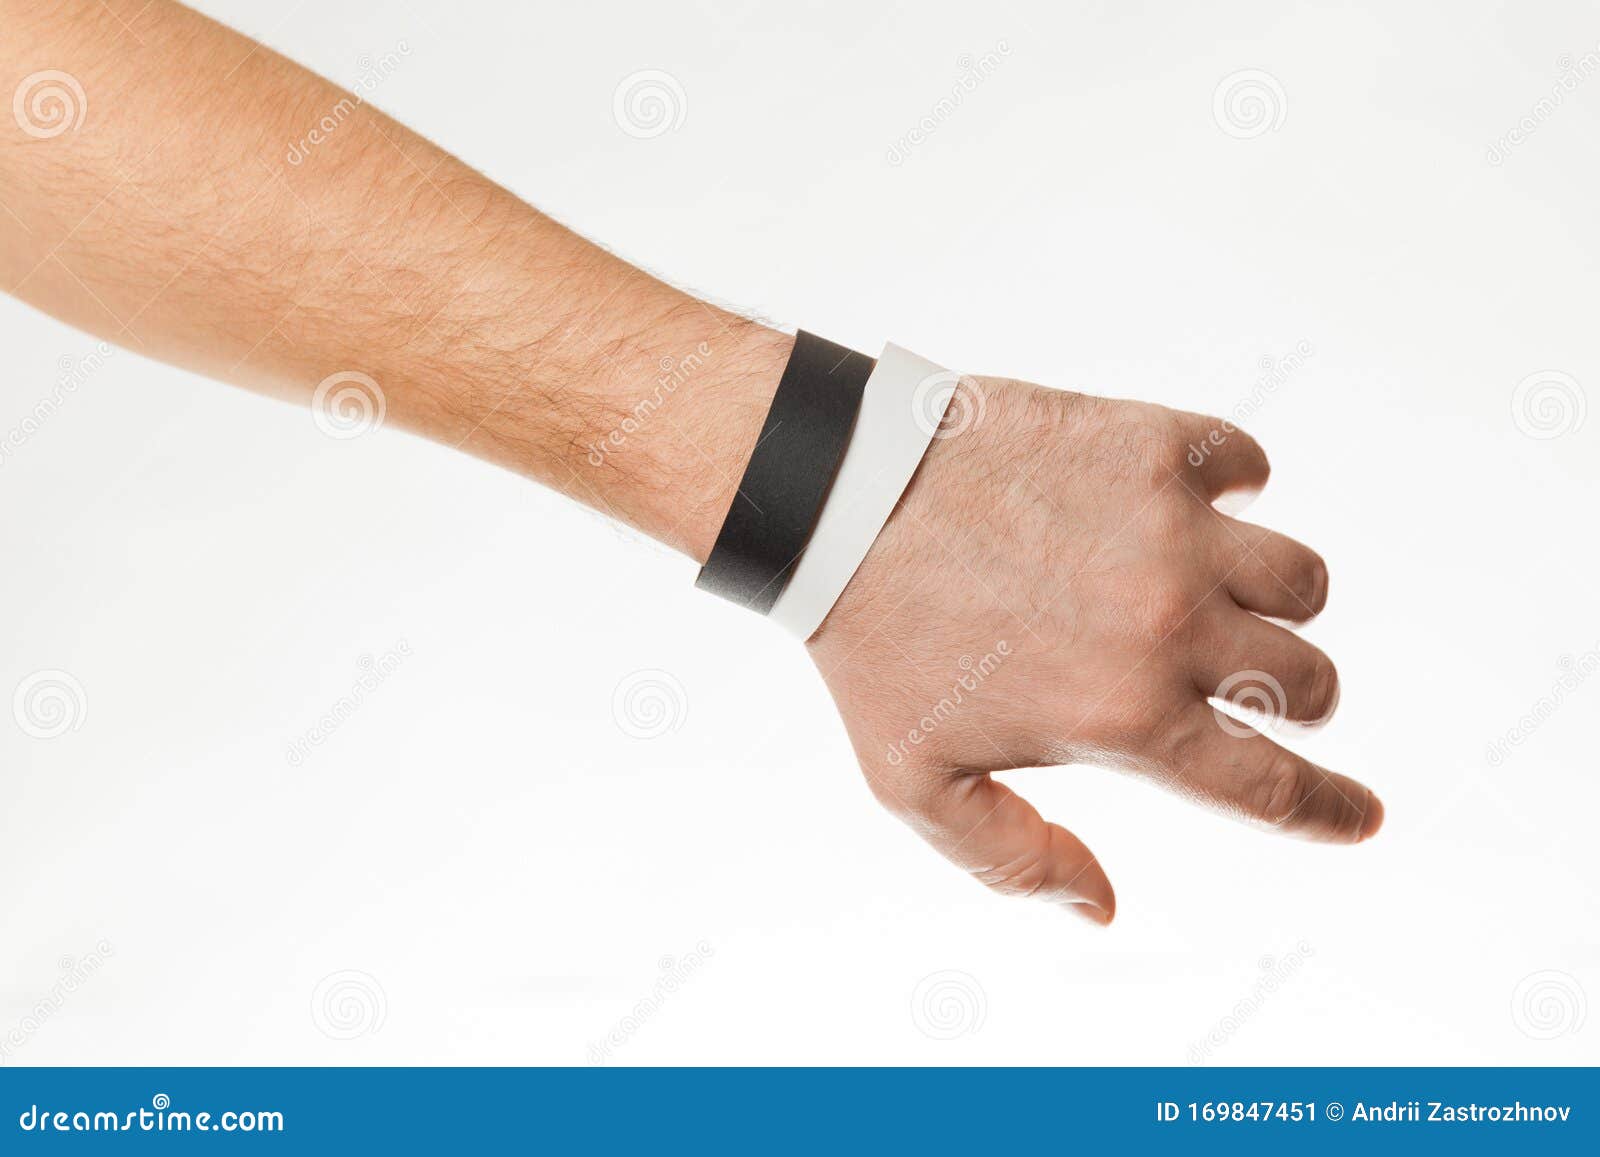 Download Rubber Wristband Mockup Photos Free Royalty Free Stock Photos From Dreamstime